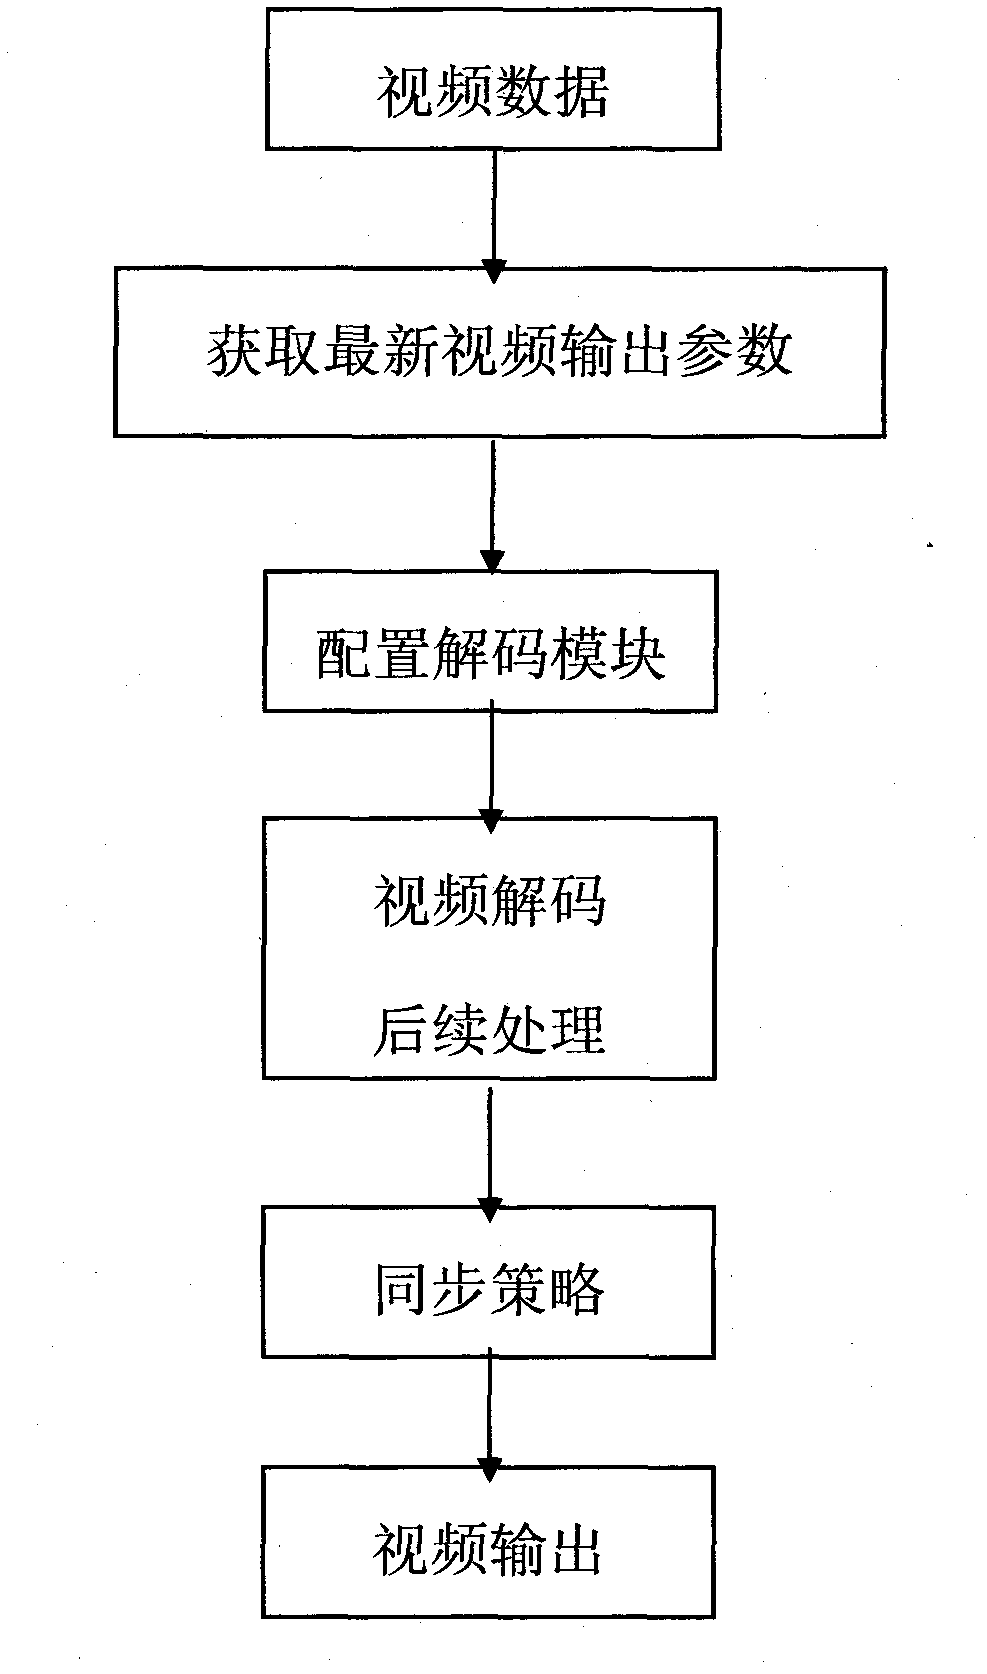 Architecture method of video decoding output model